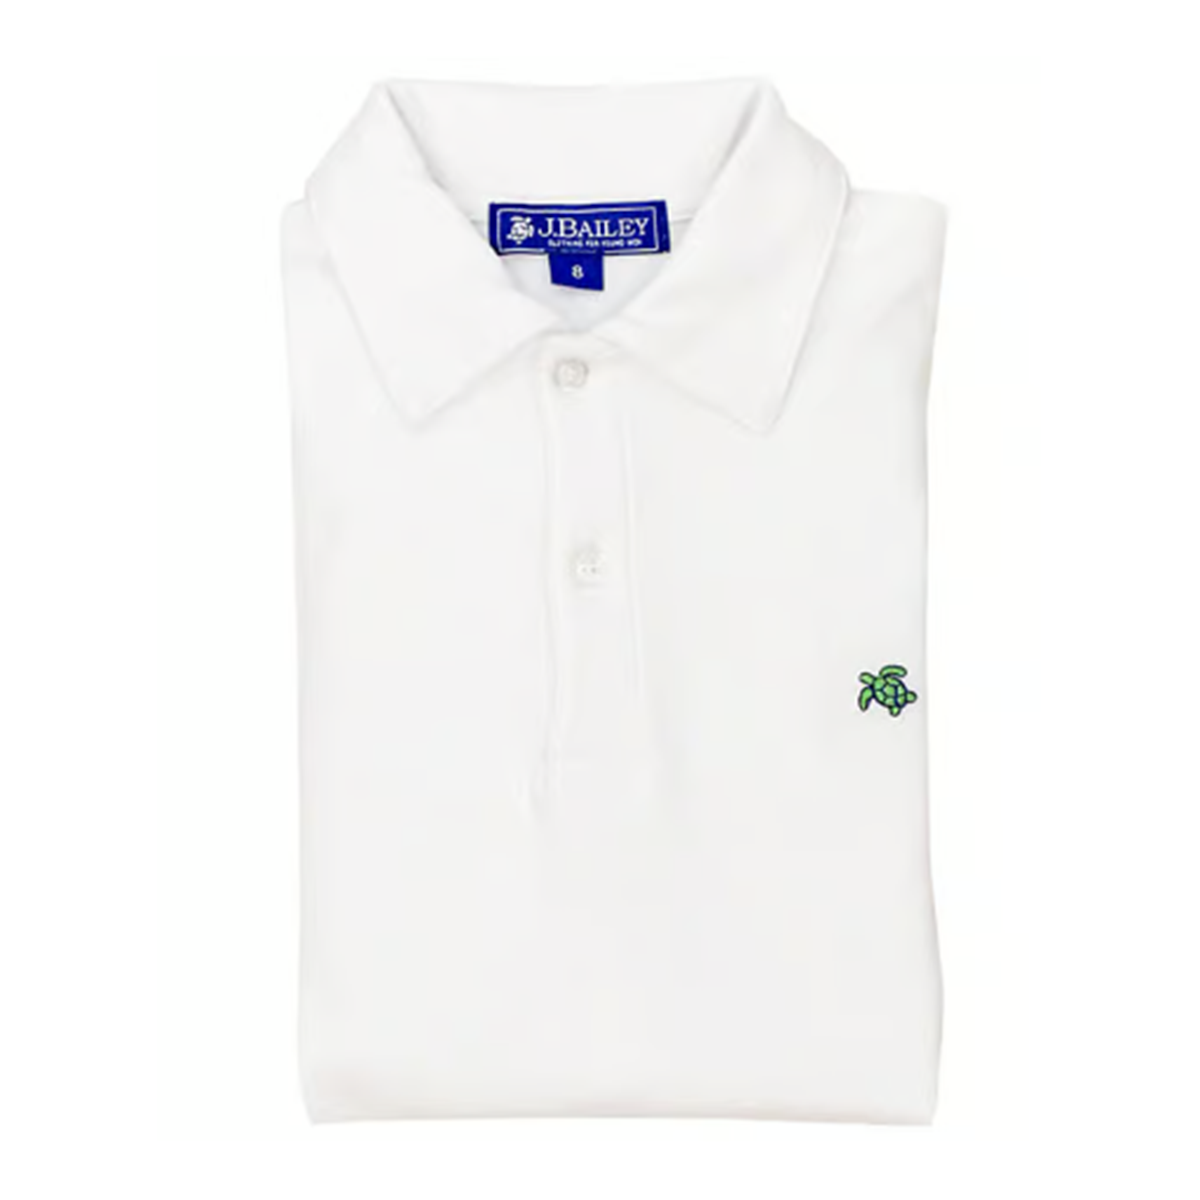 Toddler Boy's Solid White Polo Shirt by J. Bailey for Bailey Boys